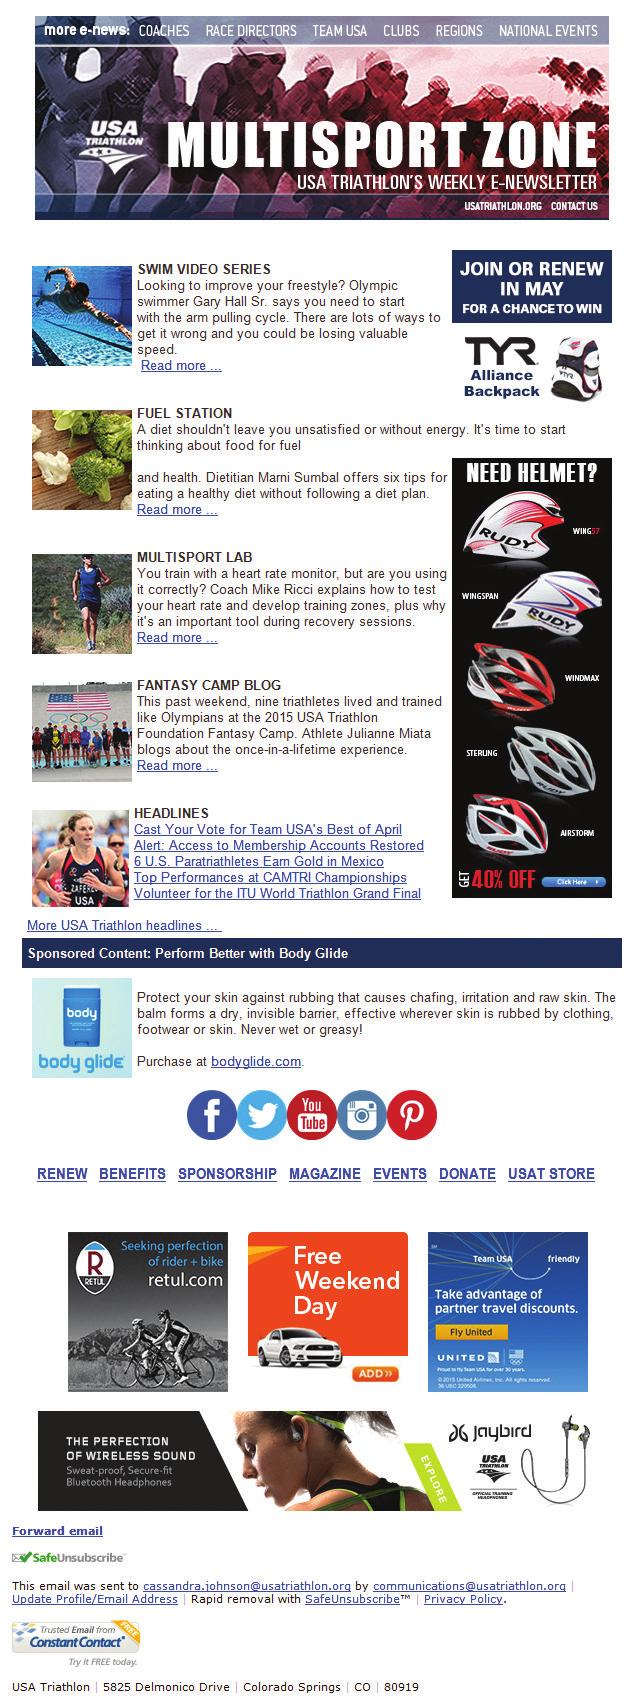 [mz e-newsletter] multisport zone e-newsletter Multisport Zone is a weekly newsletter that is sent electronically to 80,000+ USA Triathlon members with informational articles on topics of interest